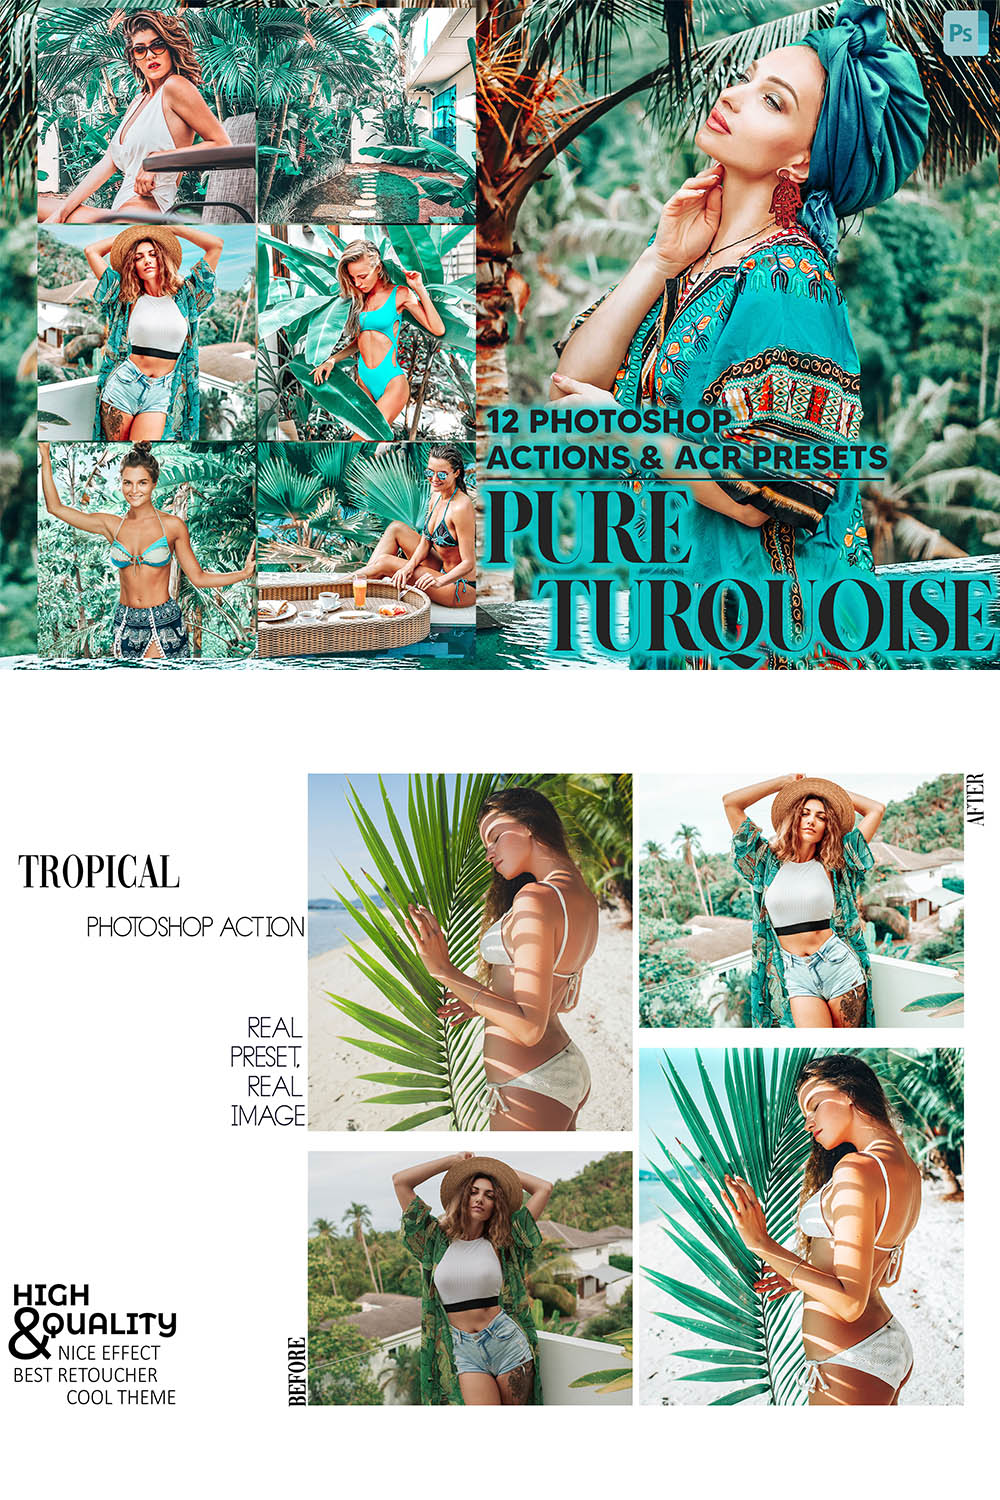 12 Photoshop Actions, Pure Turquoise Ps Action, Blue & Green ACR Preset, Warm Ps Filter, Atn Portrait And Lifestyle Theme Instagram, Blogger pinterest preview image.